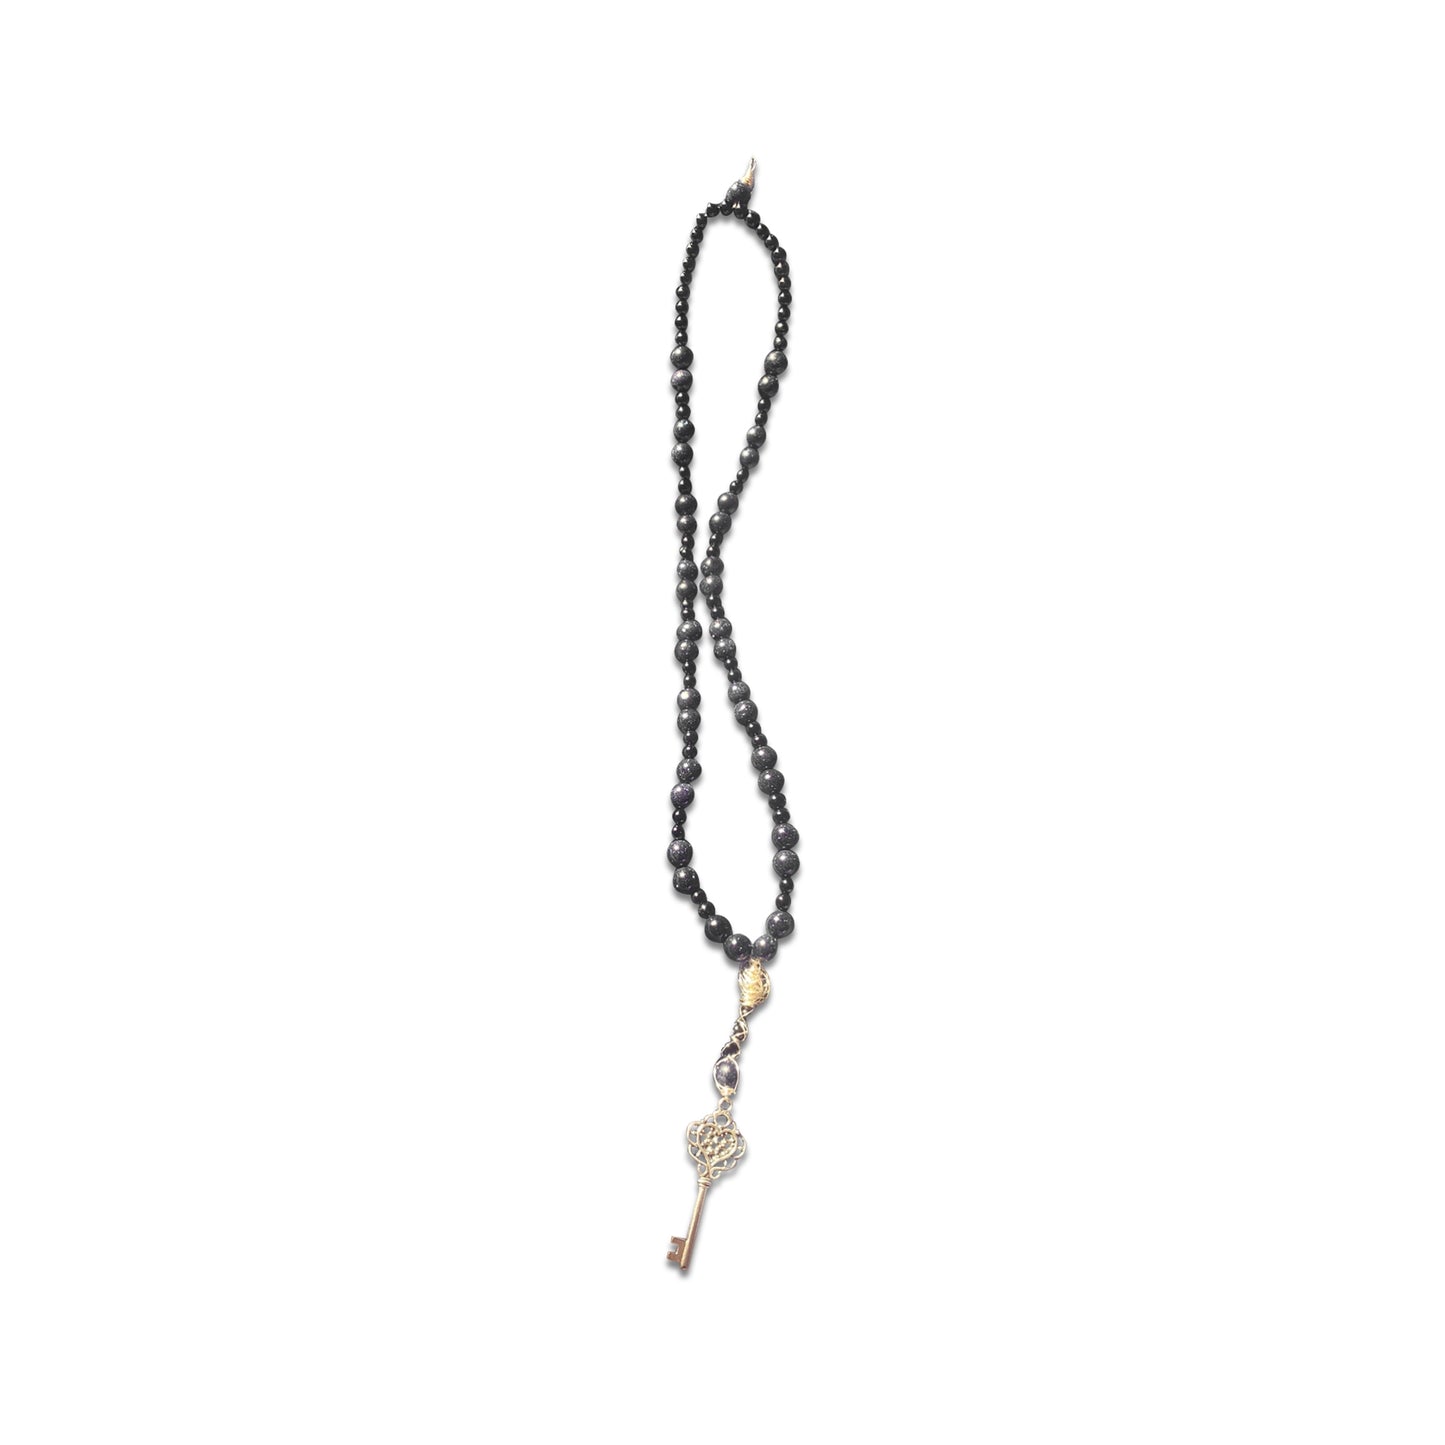 Alessandra Mattanza | ANGELS' KEY - An ART TOTEM NECKLACE, created from precious and semiprecious stones, for good energy and luck, to be hung on a wall, displayed on a table, or worn only on very special occasions